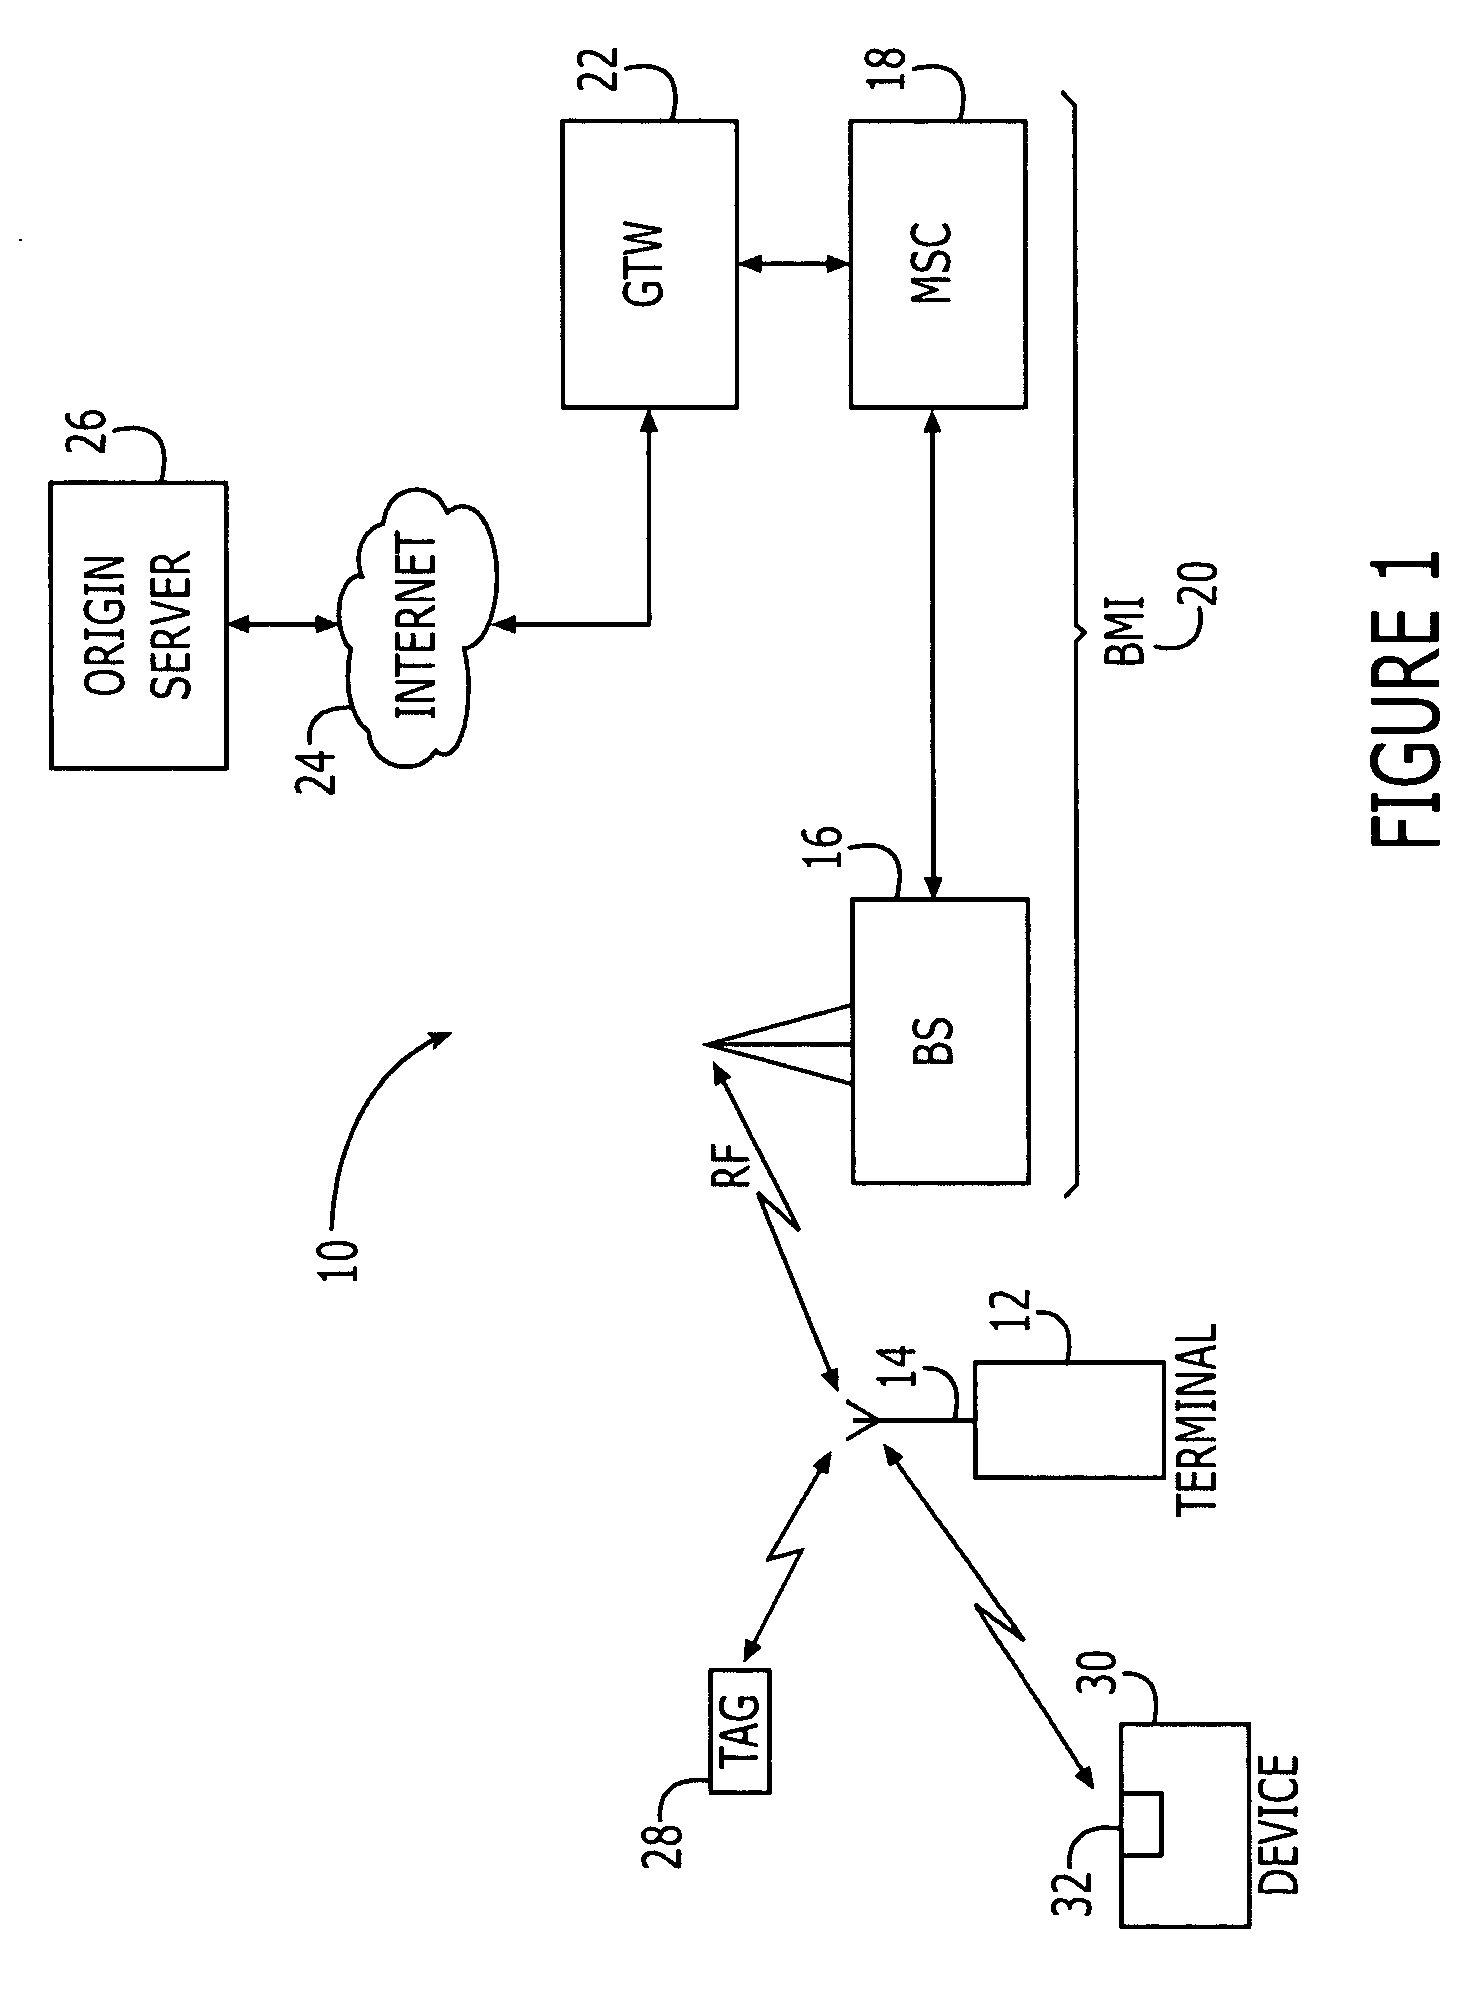 Docking of short-range wireless communication tags with mobile terminals